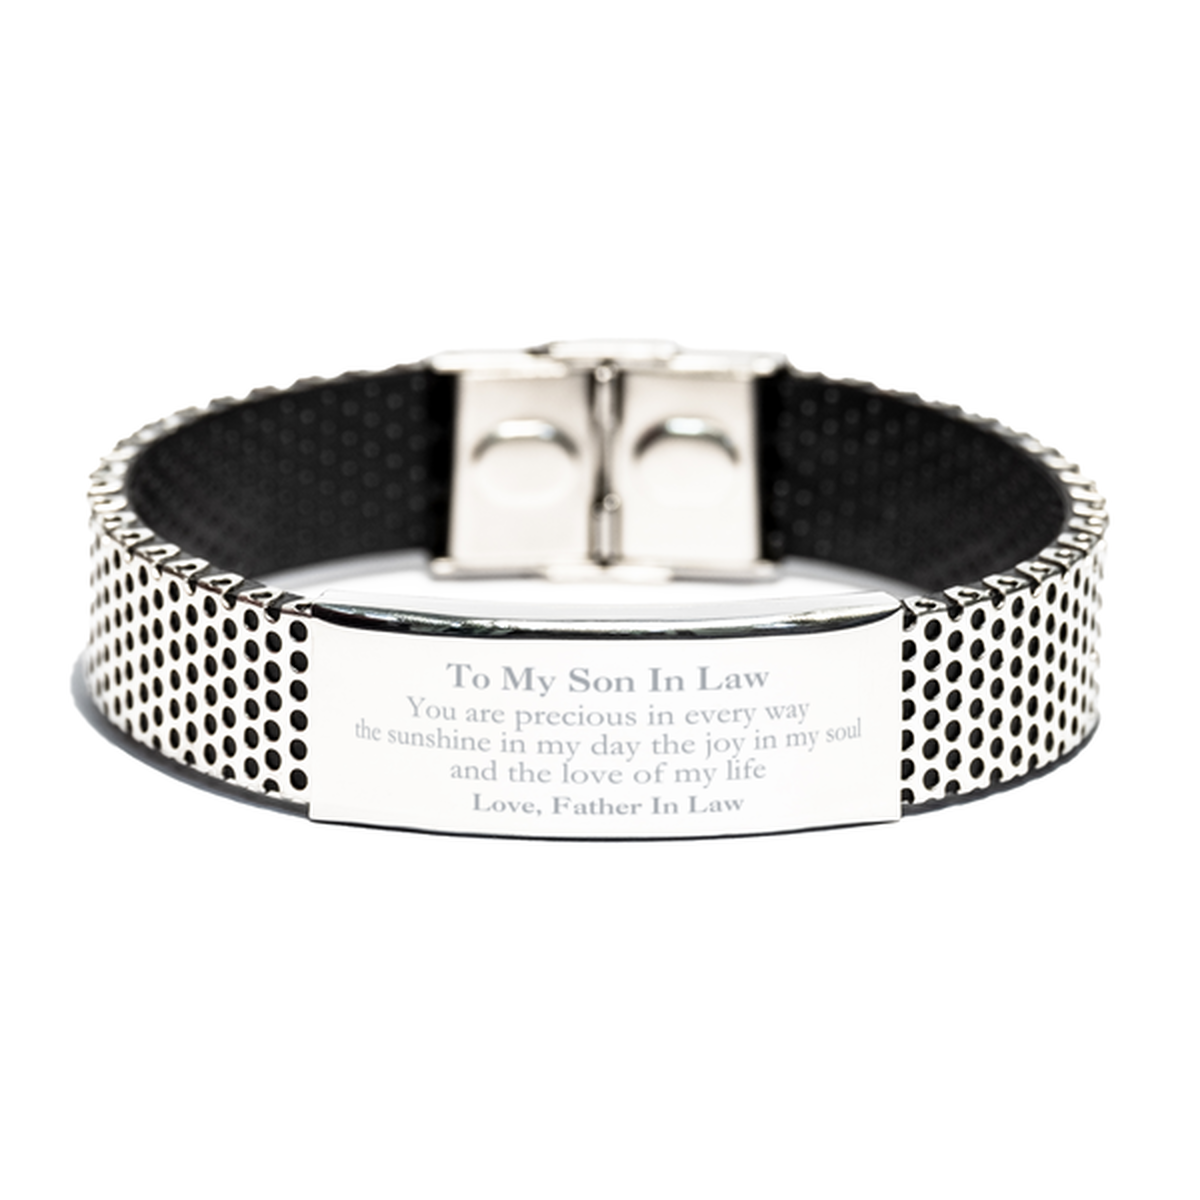 Graduation Gifts for Son In Law Stainless Steel Bracelet Present from Father In Law, Christmas Son In Law Birthday Gifts Son In Law You are precious in every way the sunshine in my day. Love, Father In Law